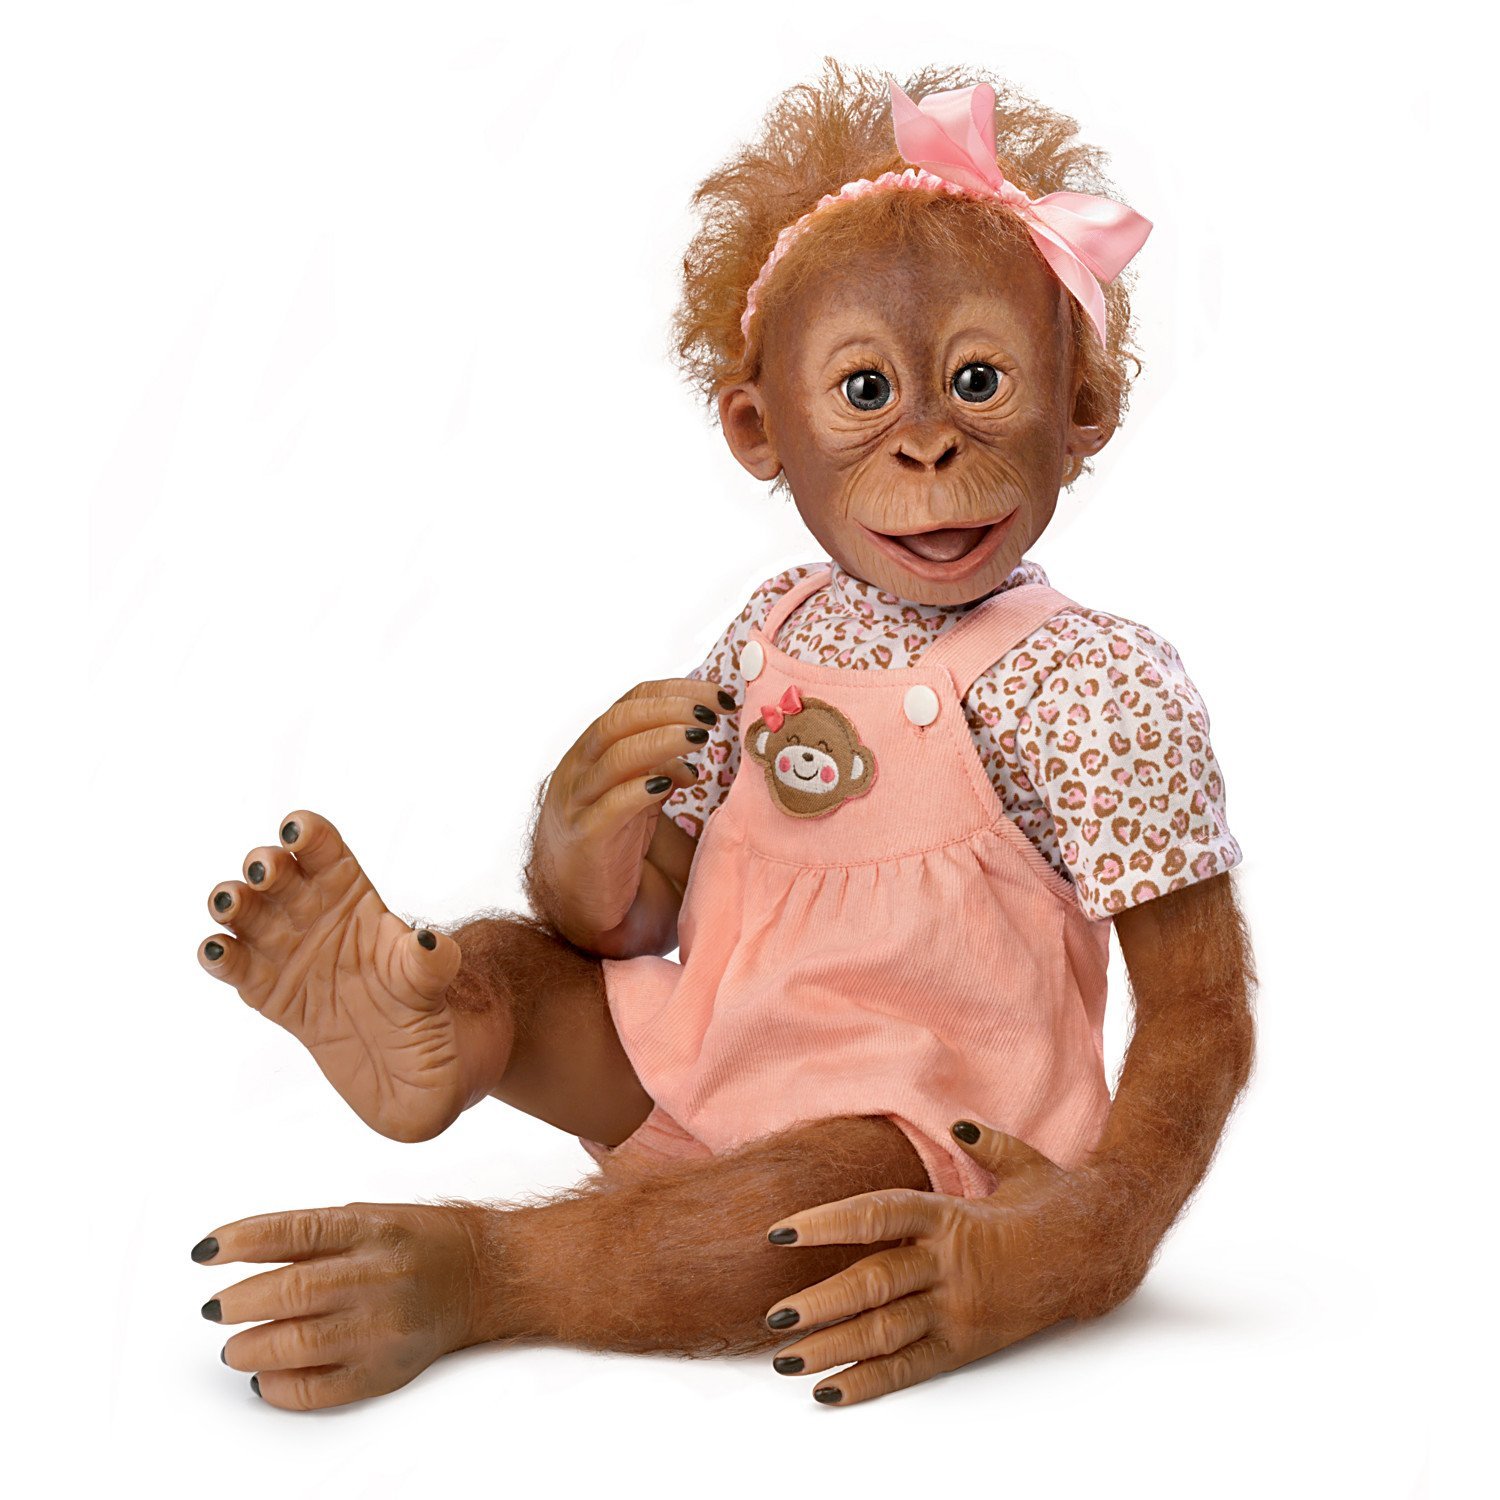 Amazon.com: Realistic Baby Monkey Doll by Ina Volprich Holds Every ...